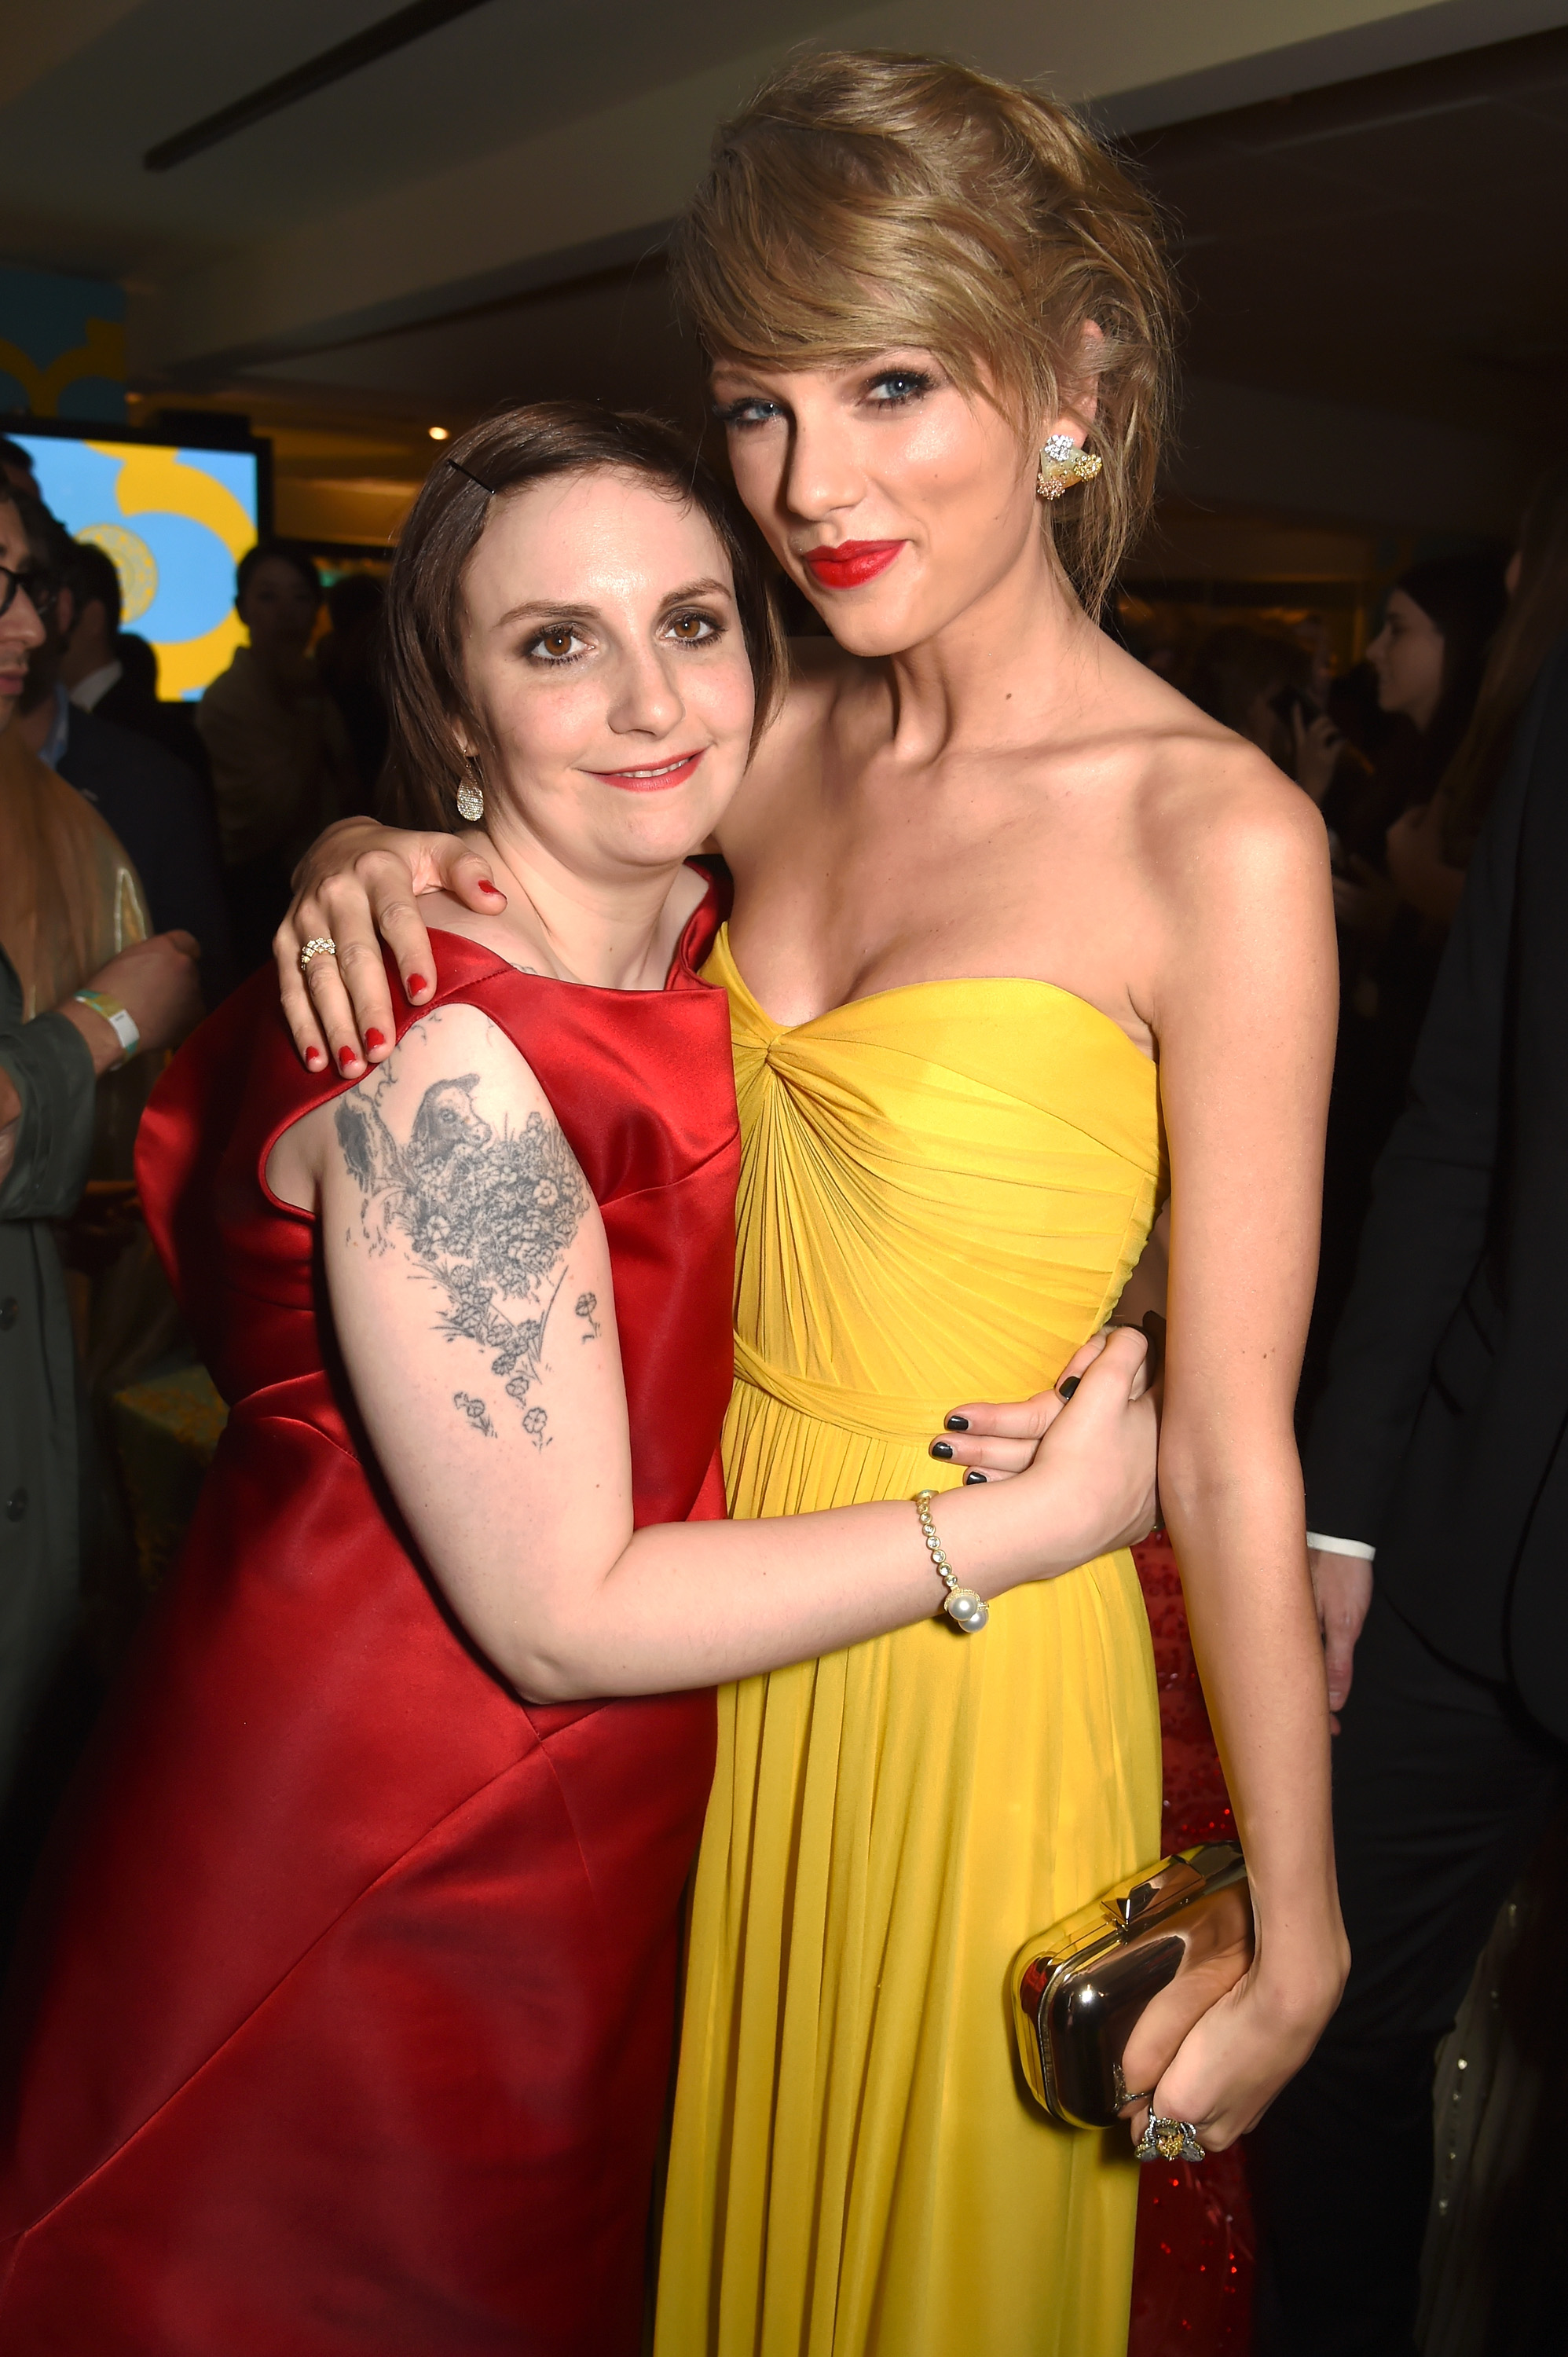 BEVERLY HILLS, CA - JANUARY 11:  Actress/director Lena Dunham (L) and singer/songwriter Taylor Swift attend HBO's Official Golden Globe Awards After Party at The Beverly Hilton Hotel on January 11, 2015 in Beverly Hills, California.  (Photo by Jeff Kravitz/FilmMagic) (Jeff Kravitz—FilmMagic)